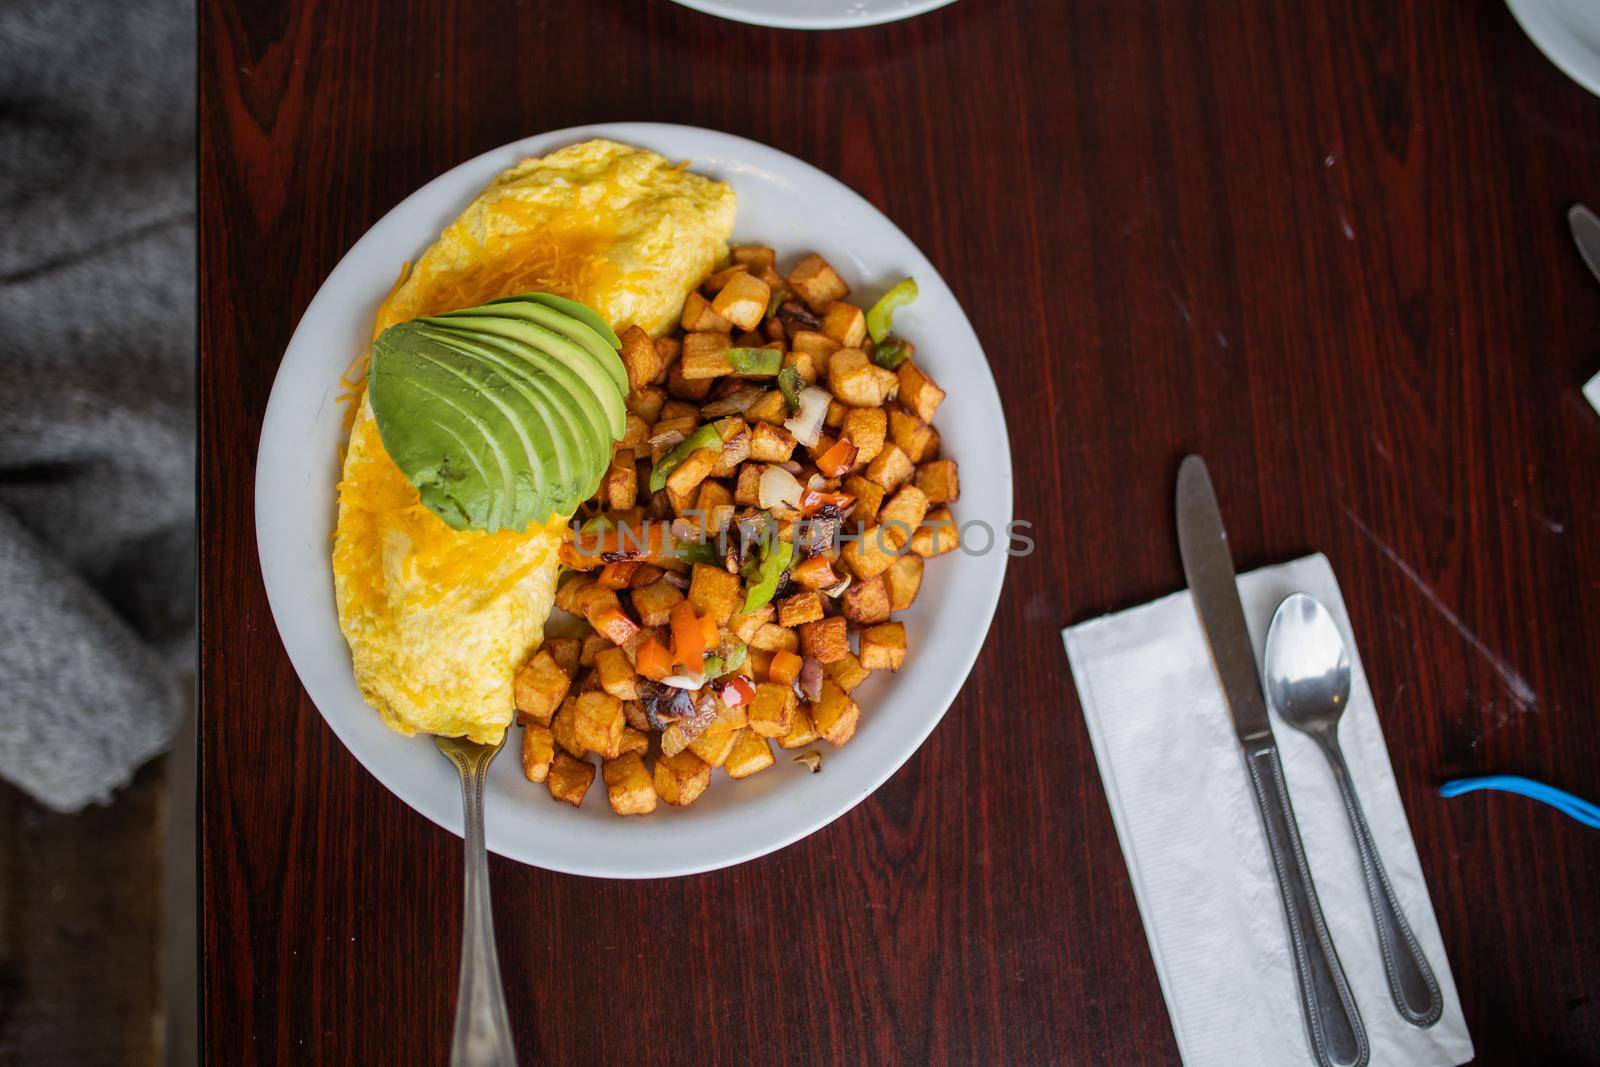 Top view of omelette, roasted potatoes and avocado slices on white plate above wooden table. Cutlery and tasty-looking dish with eggs and chopped potatoes. Delicious balanced diet